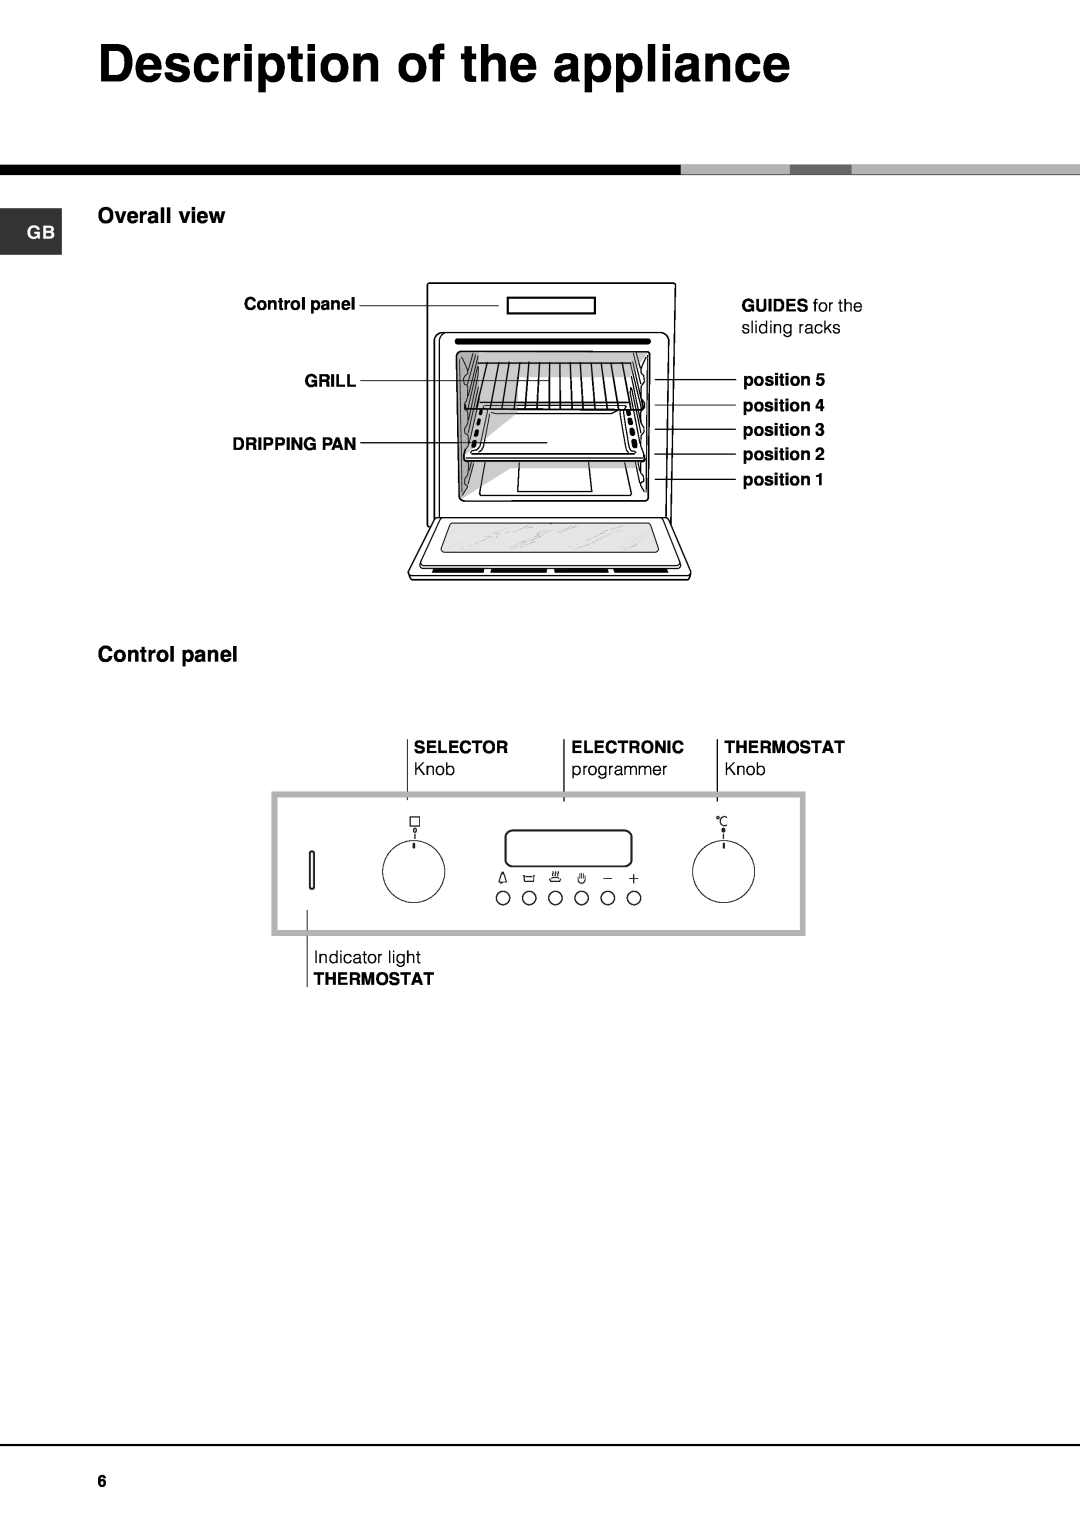 Hotpoint SE861X manual Description of the appliance, Overall view, Control panel GRILL DRIPPING PAN 